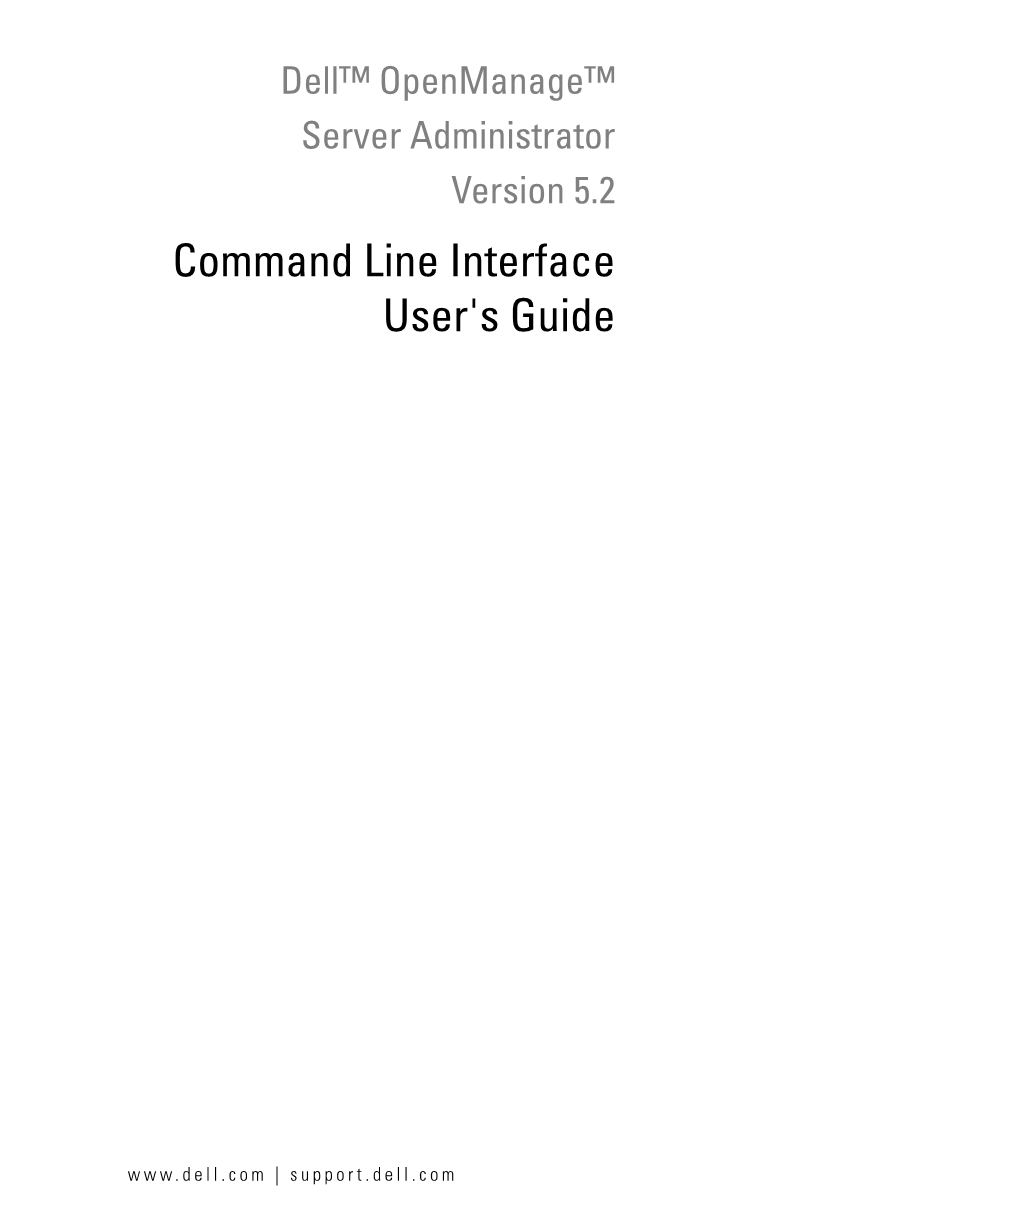 Command Line Interface User's Guide